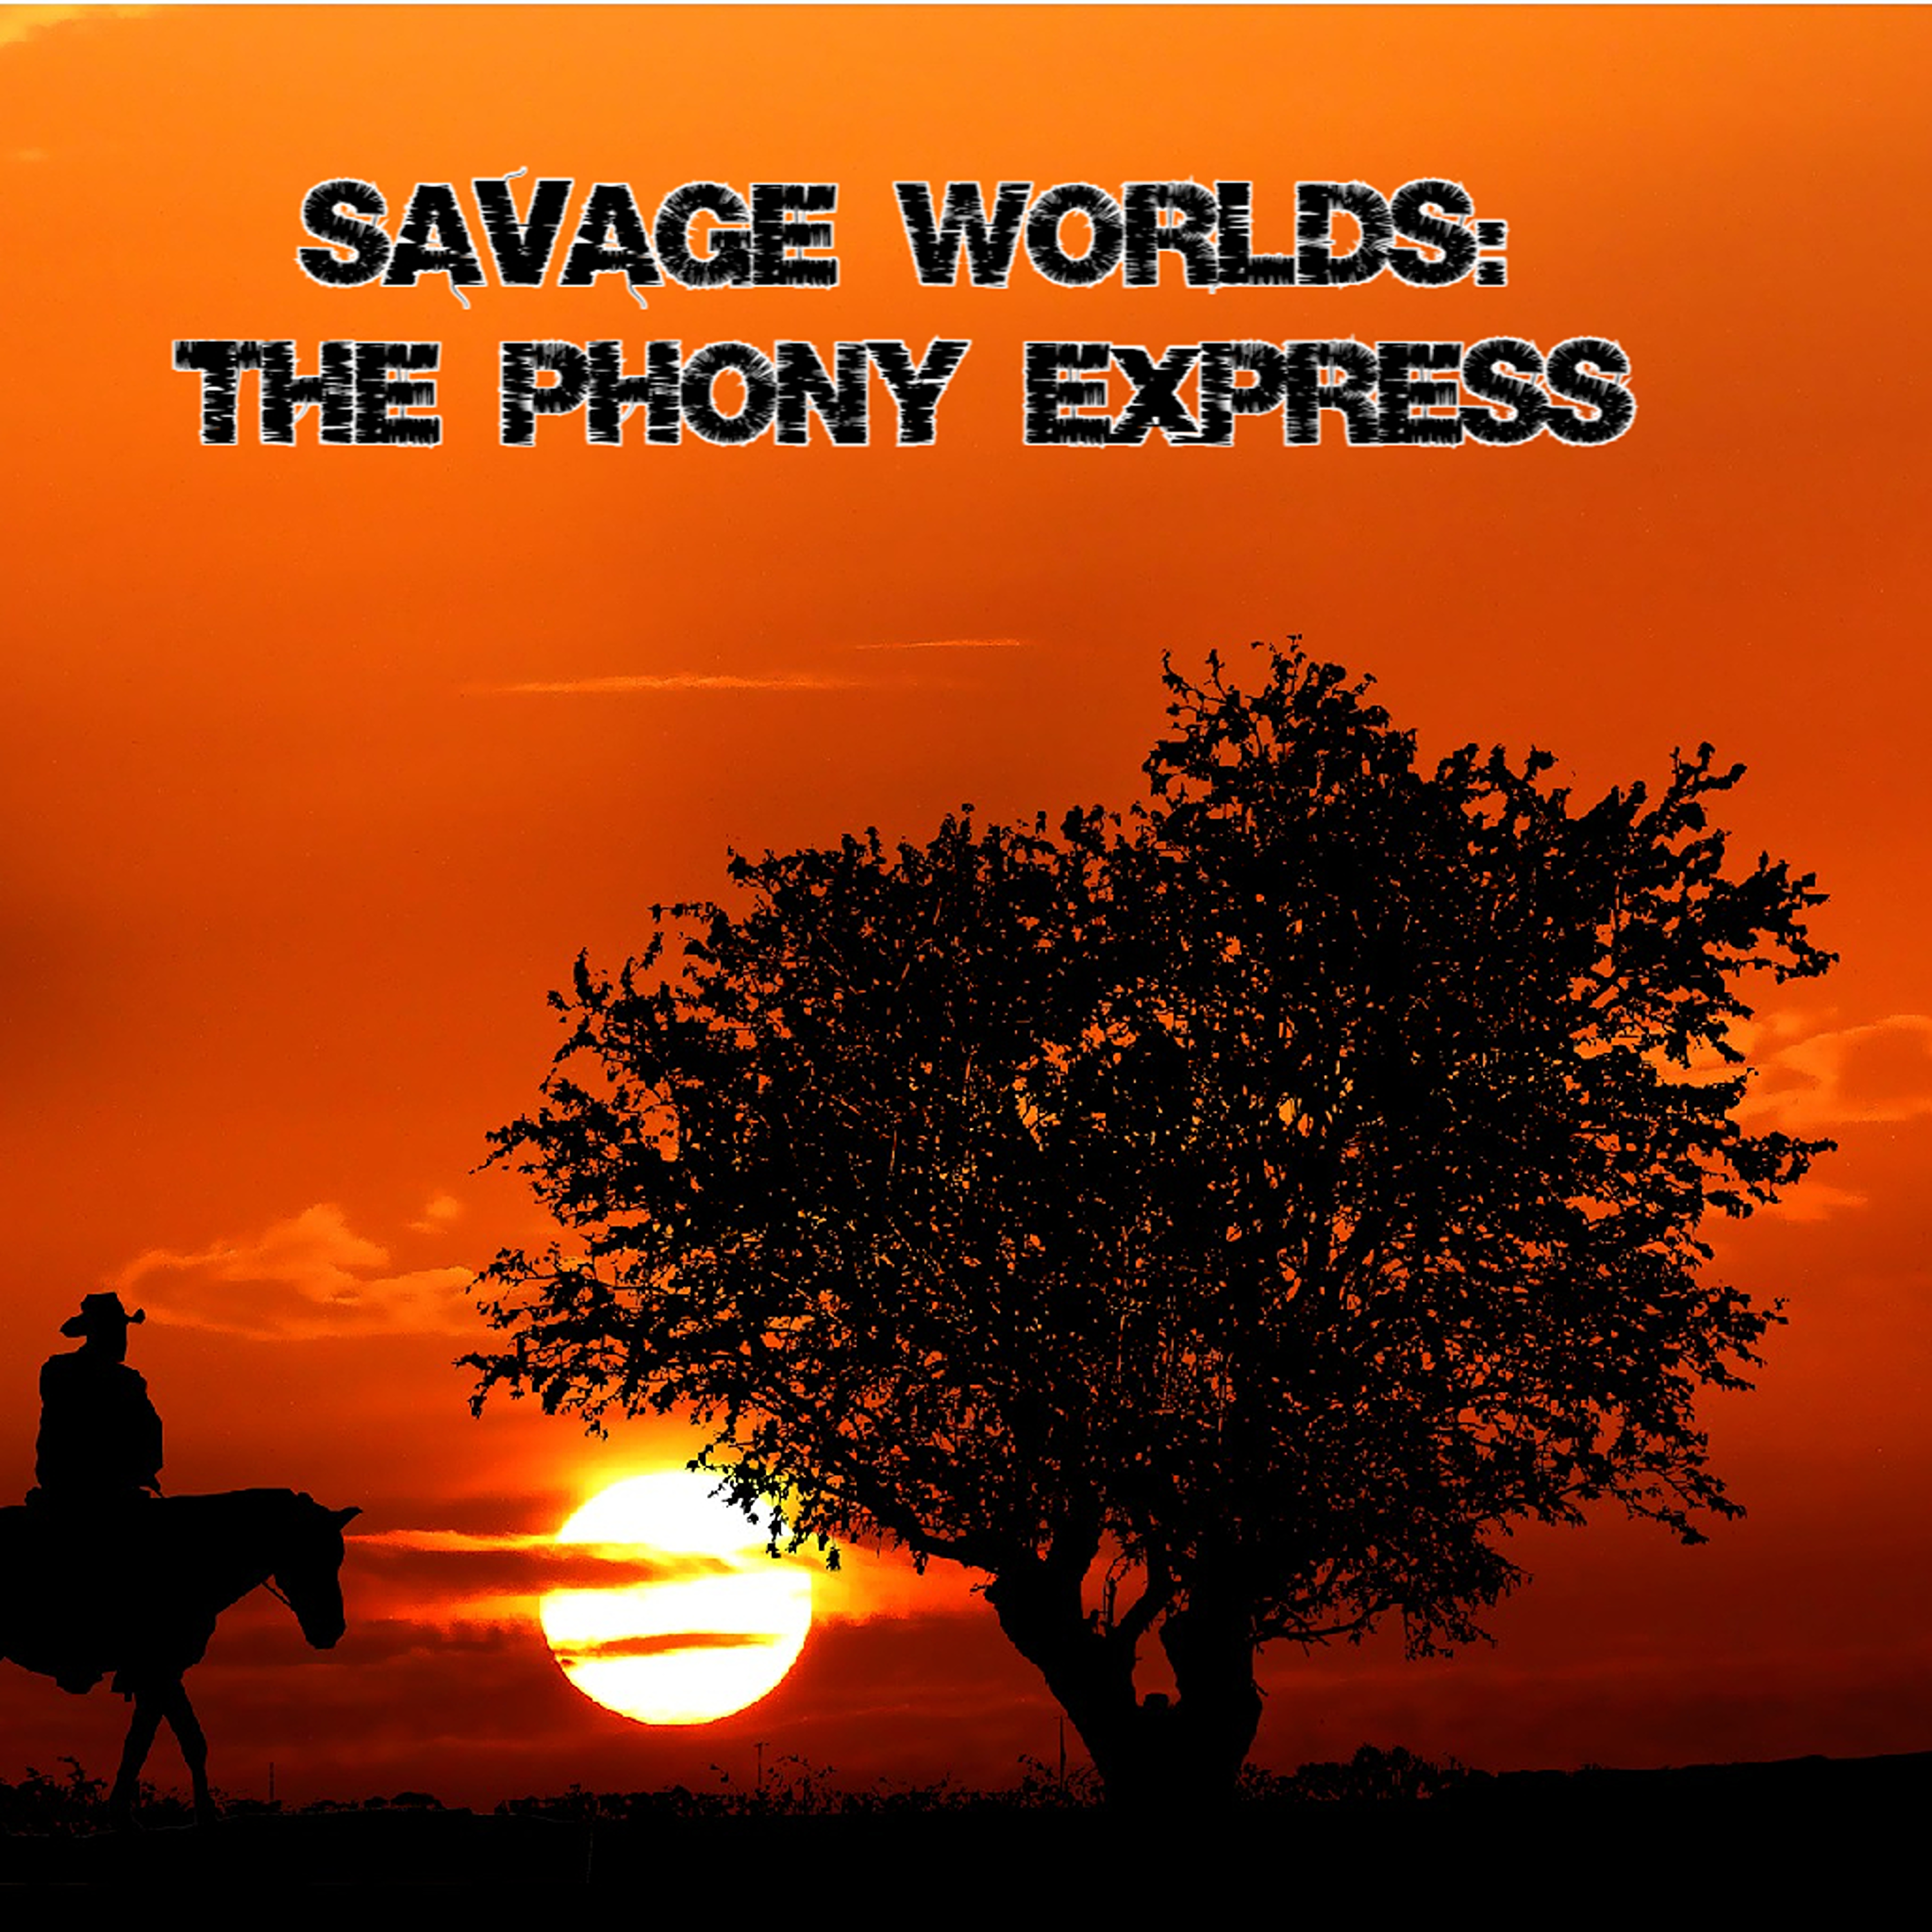 Savage Worlds - The Phony Express 1.3: It's A Brothel Episode